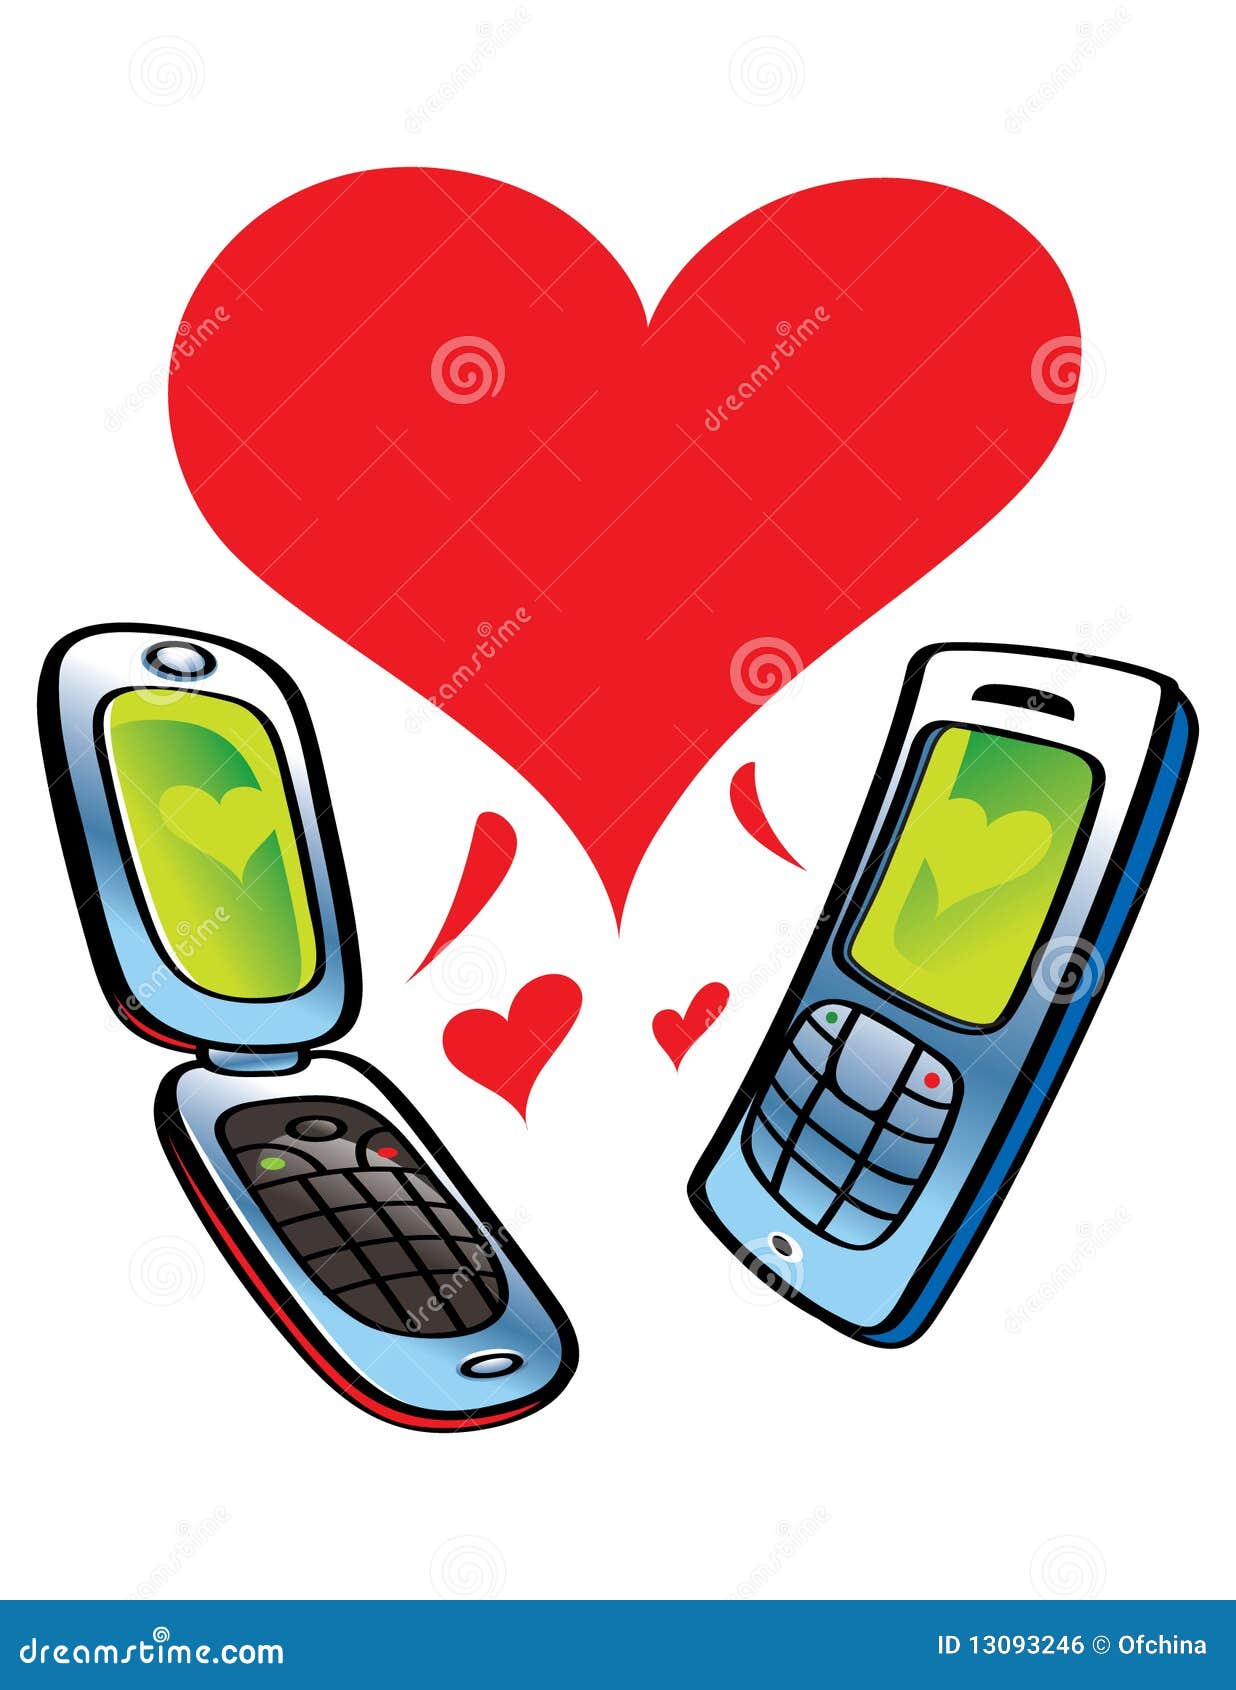 Cell Phone Love Royalty Free Stock Image - Image: 13093246